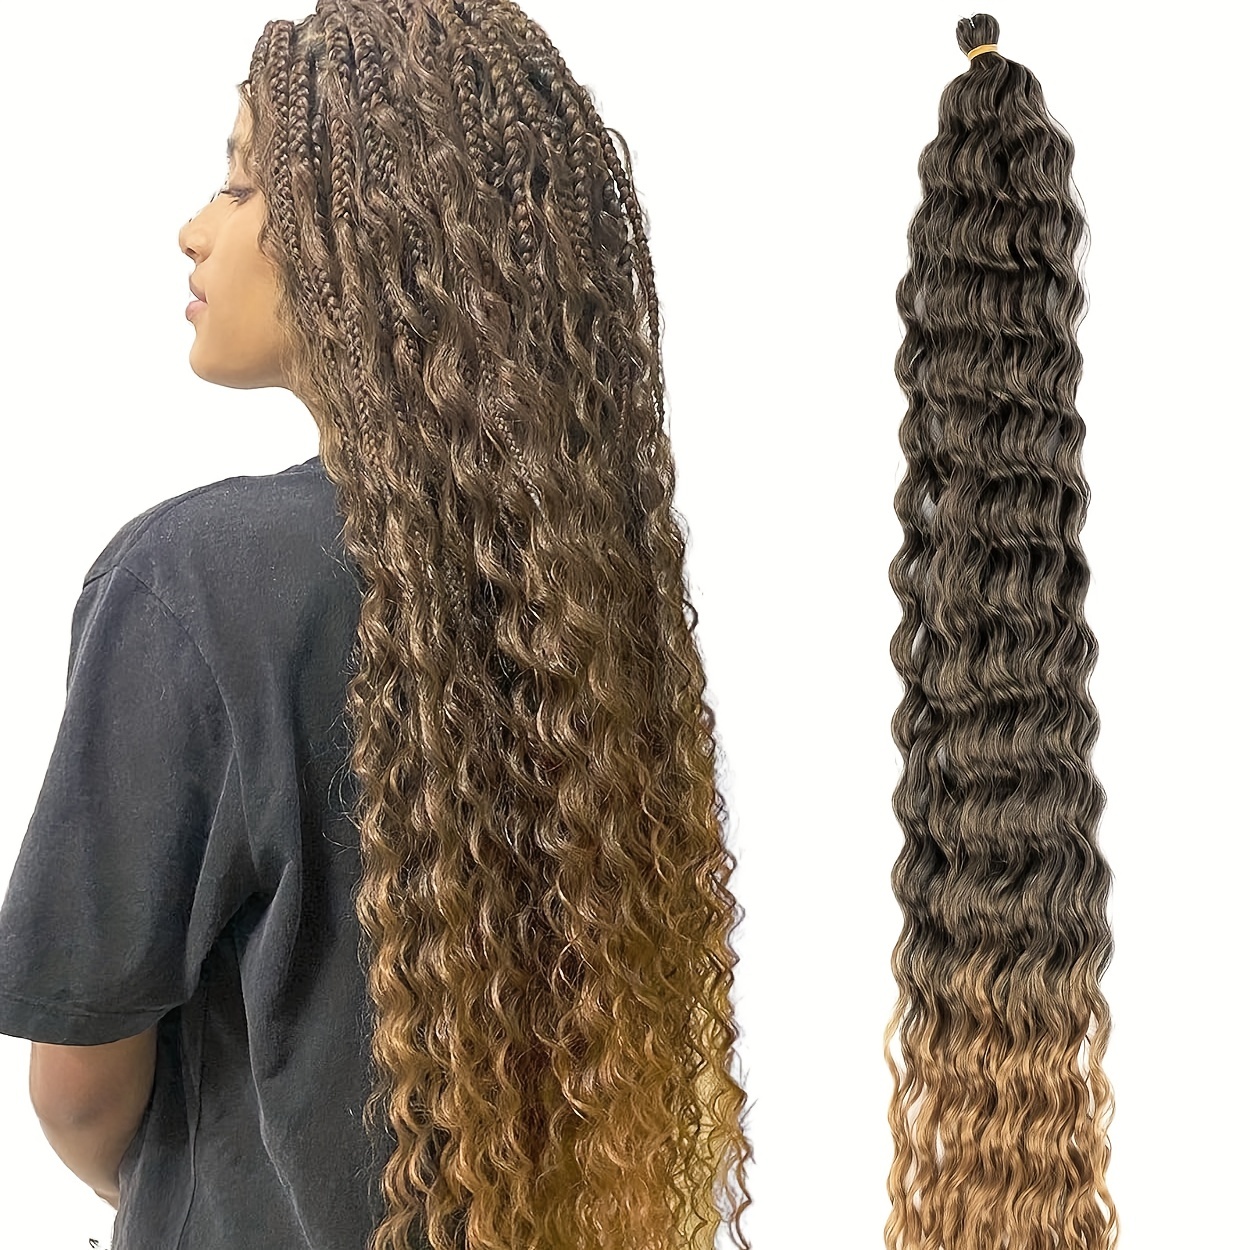 8 Packs Deep Wave Crochet Hair Curly 18 Inch Pre-feathered Waves Curly  Braiding Hair Extensions Ocean Wave Crochet Hair for Bohemian Boho Box  Braids